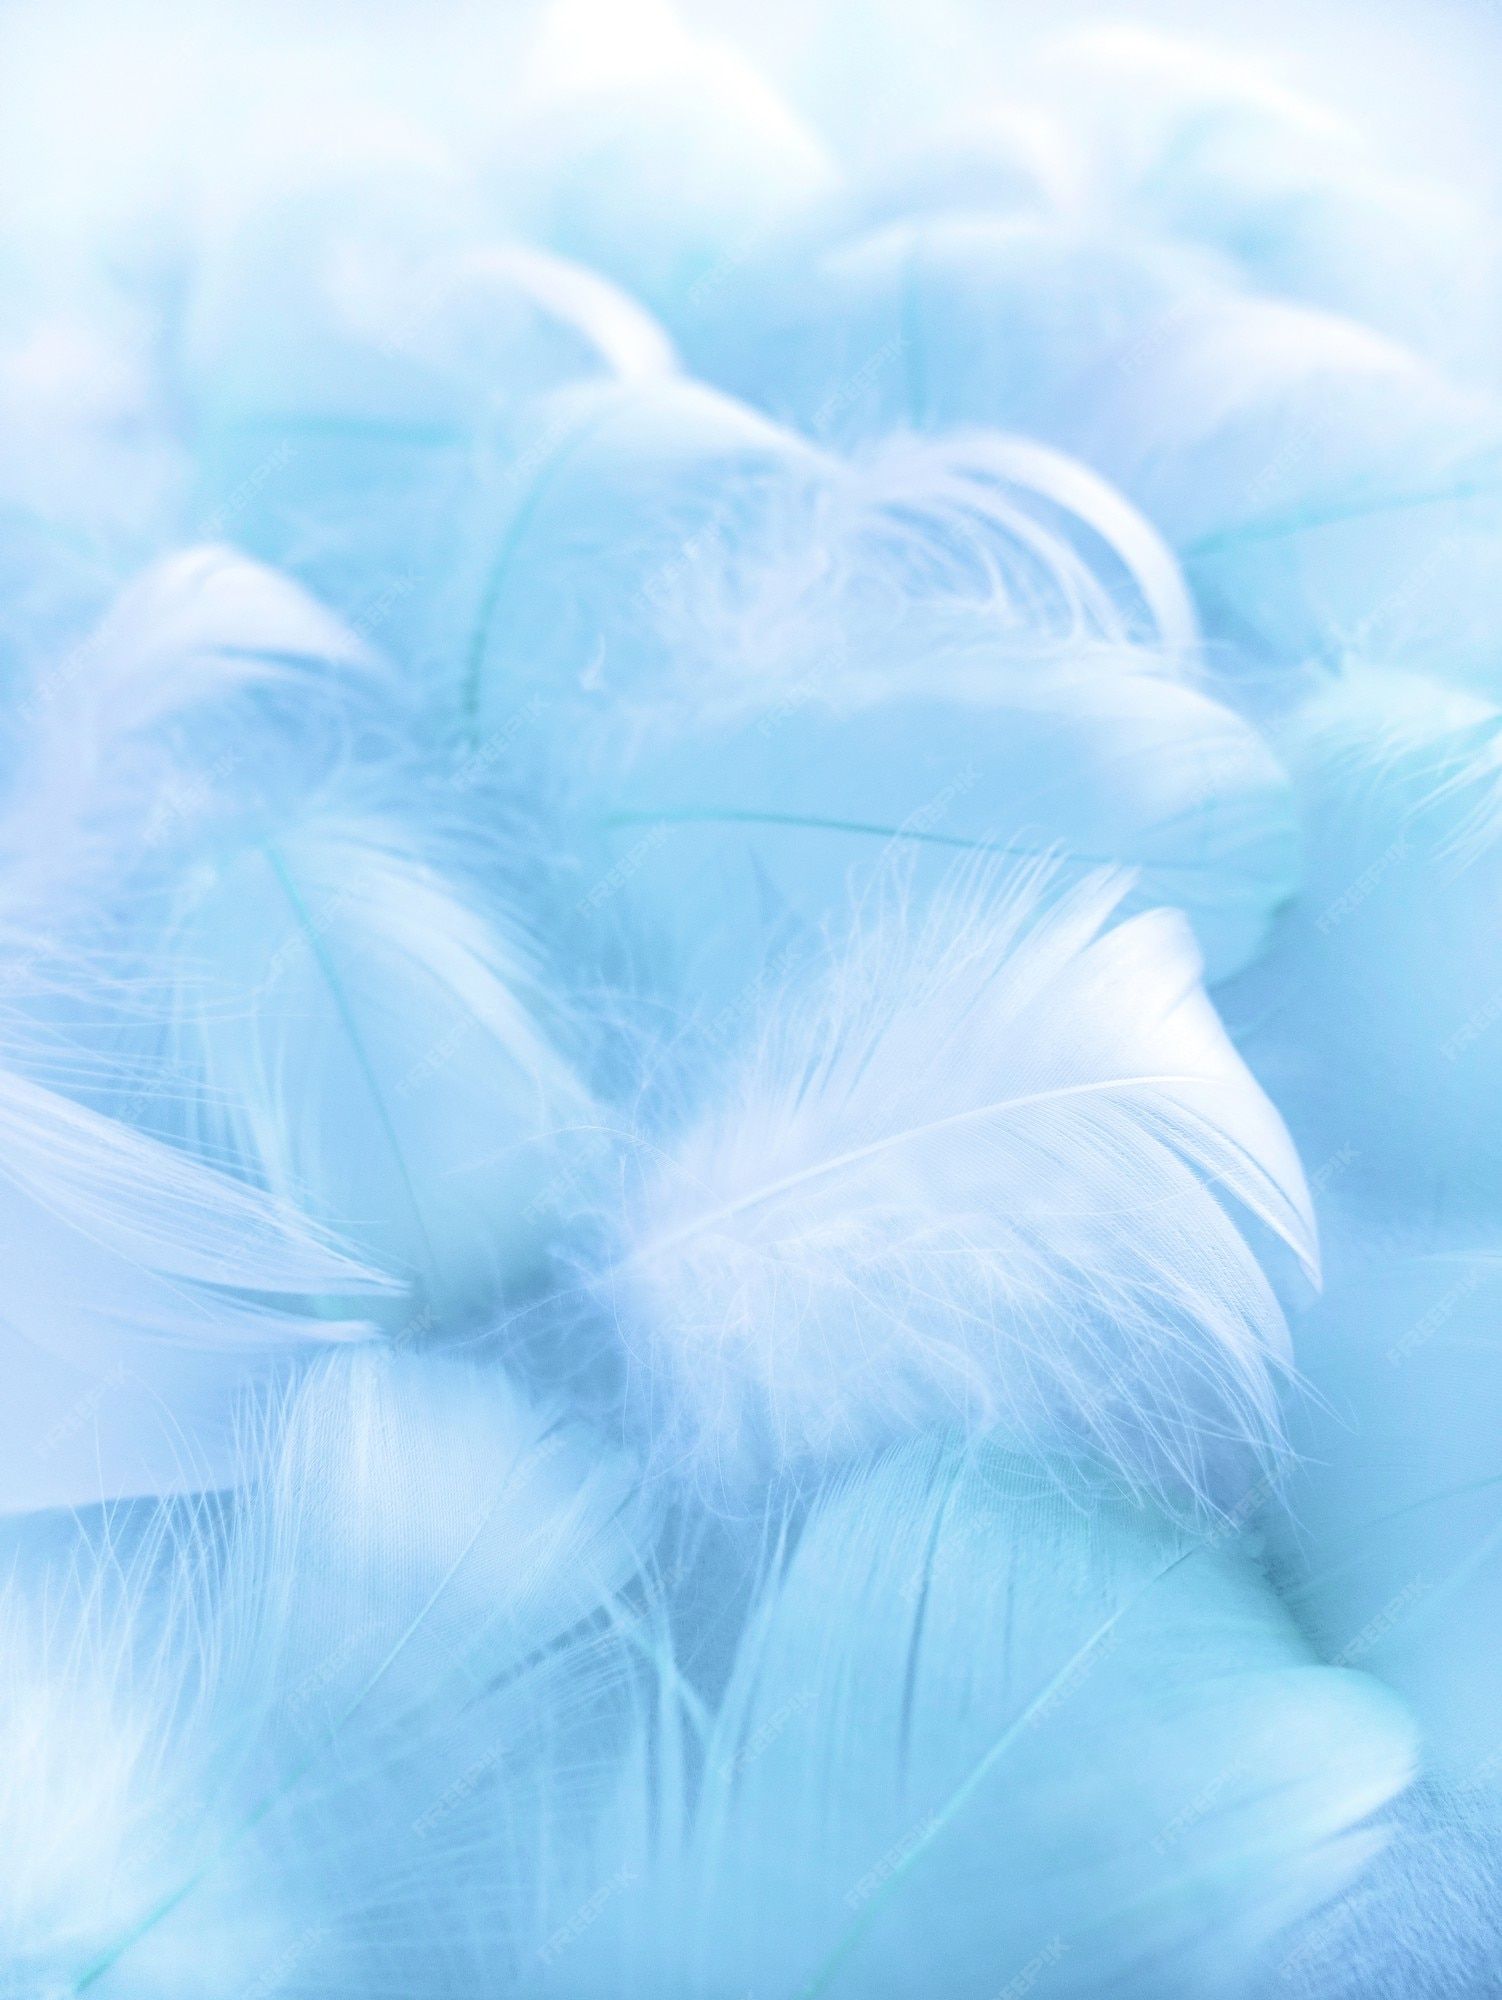 A pile of blue fluffy bird feathers. - Feathers